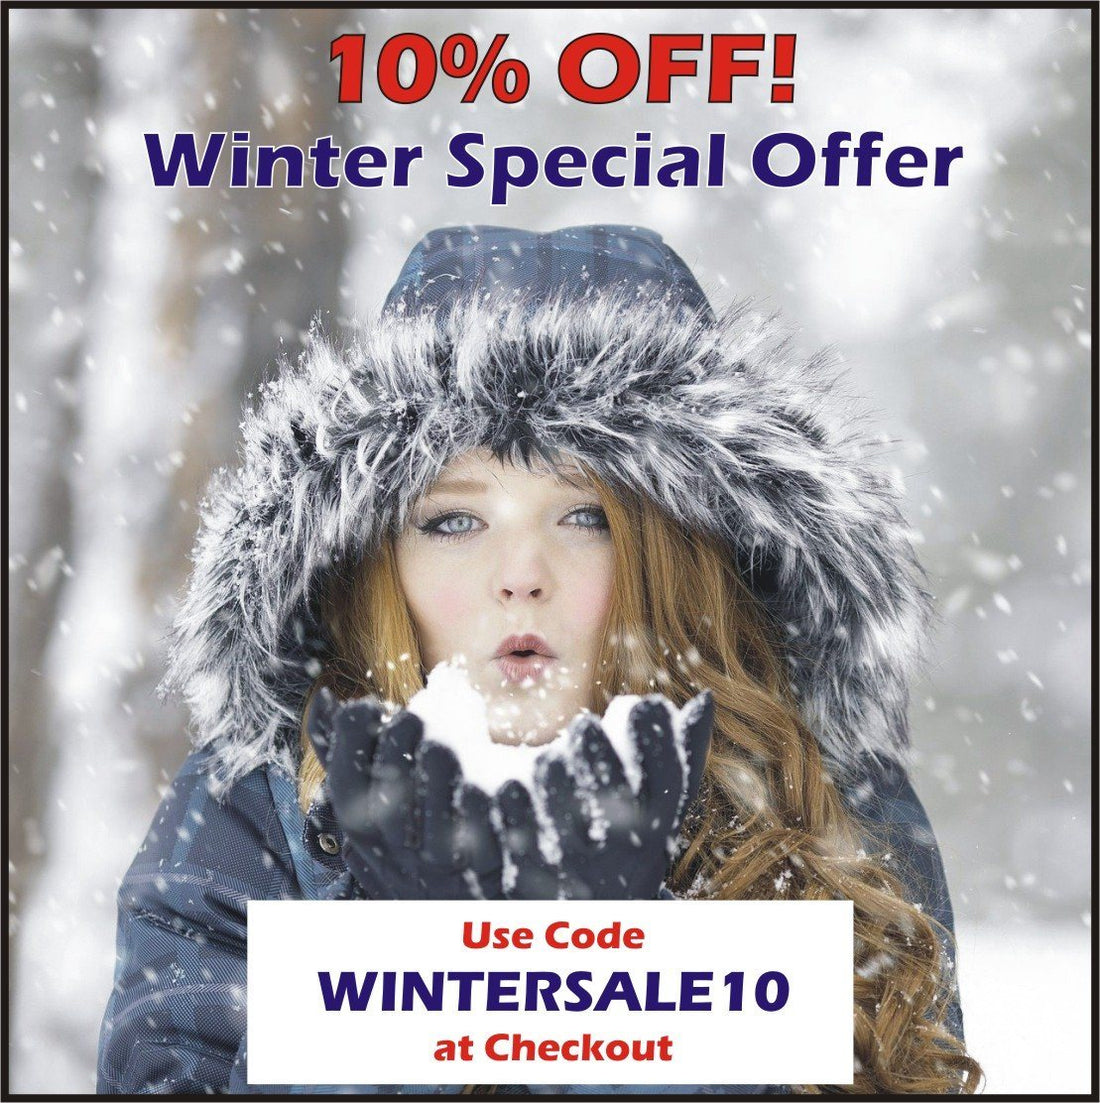 Winter Special Offer 10% OFF!